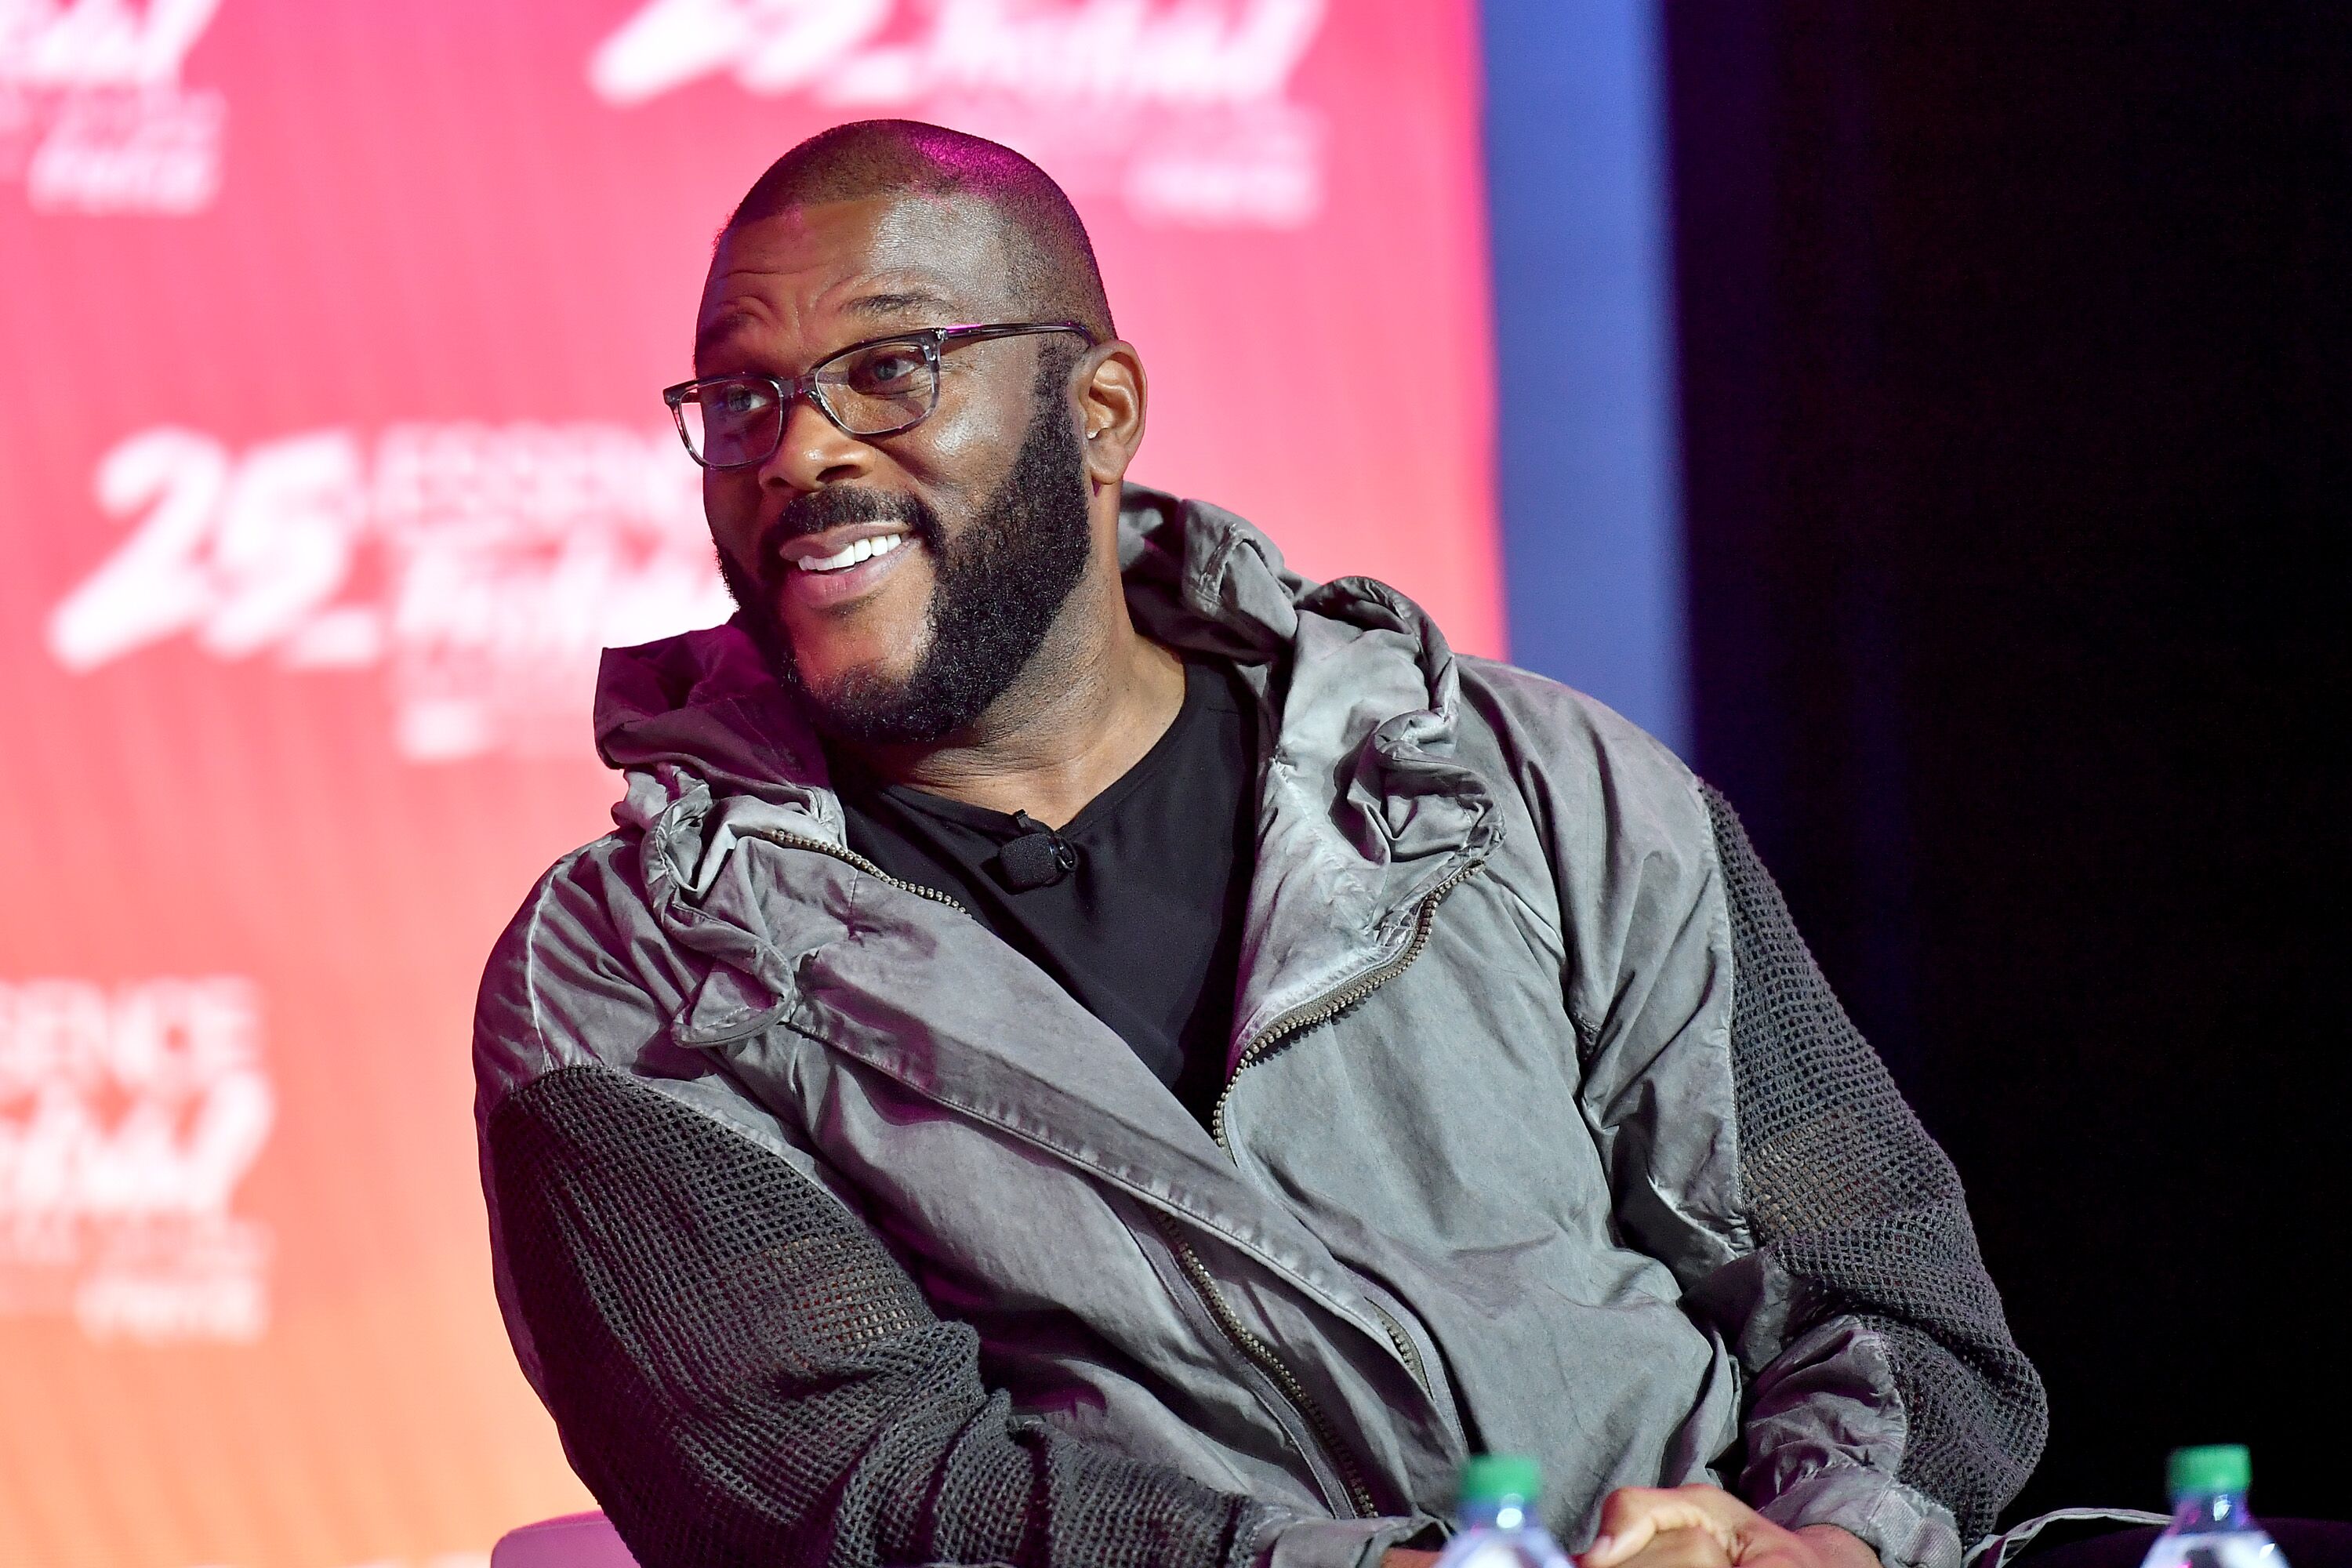 Tyler Perry at one of his speaking engagements | Source: Getty Images/GlobalImagesUkraine